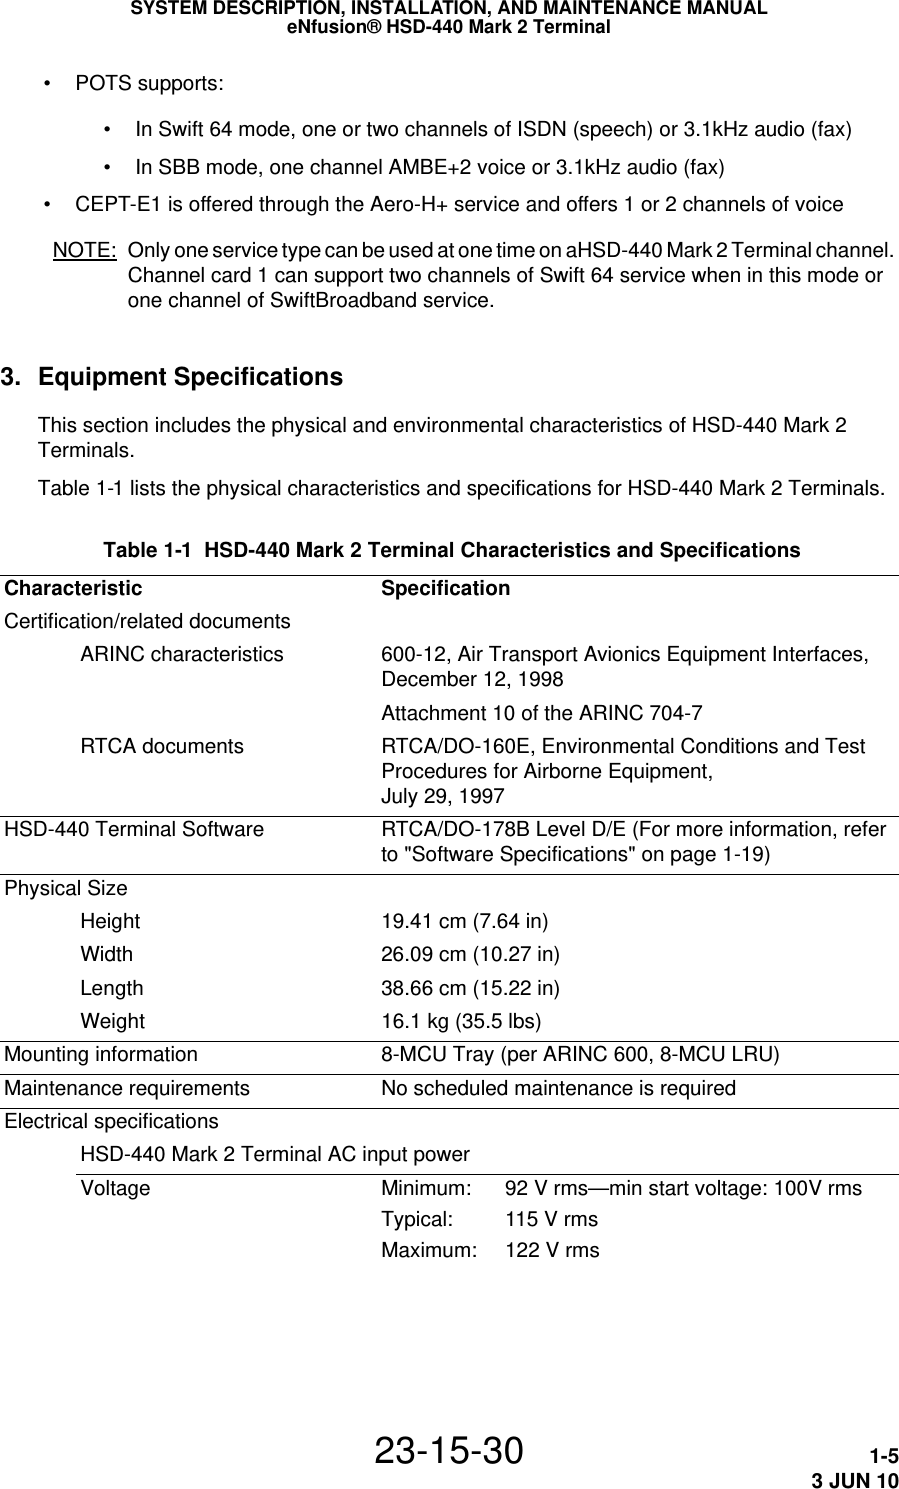 SYSTEM DESCRIPTION, INSTALLATION, AND MAINTENANCE MANUALeNfusion® HSD-440 Mark 2 Terminal23-15-30 1-53 JUN 10 • POTS supports: • In Swift 64 mode, one or two channels of ISDN (speech) or 3.1kHz audio (fax) • In SBB mode, one channel AMBE+2 voice or 3.1kHz audio (fax) • CEPT-E1 is offered through the Aero-H+ service and offers 1 or 2 channels of voiceNOTE: Only one service type can be used at one time on aHSD-440 Mark 2 Terminal channel. Channel card 1 can support two channels of Swift 64 service when in this mode or one channel of SwiftBroadband service.3. Equipment SpecificationsThis section includes the physical and environmental characteristics of HSD-440 Mark 2 Terminals.Table 1-1 lists the physical characteristics and specifications for HSD-440 Mark 2 Terminals. Table 1-1  HSD-440 Mark 2 Terminal Characteristics and Specifications Characteristic SpecificationCertification/related documentsARINC characteristics 600-12, Air Transport Avionics Equipment Interfaces, December 12, 1998Attachment 10 of the ARINC 704-7RTCA documents RTCA/DO-160E, Environmental Conditions and Test Procedures for Airborne Equipment,  July 29, 1997HSD-440 Terminal Software RTCA/DO-178B Level D/E (For more information, refer to &quot;Software Specifications&quot; on page 1-19)Physical SizeHeight 19.41 cm (7.64 in)Width 26.09 cm (10.27 in)Length 38.66 cm (15.22 in)Weight 16.1 kg (35.5 lbs)Mounting information 8-MCU Tray (per ARINC 600, 8-MCU LRU)Maintenance requirements No scheduled maintenance is requiredElectrical specificationsHSD-440 Mark 2 Terminal AC input powerVoltage Minimum: 92 V rms—min start voltage: 100V rmsTypical: 115 V rmsMaximum: 122 V rms